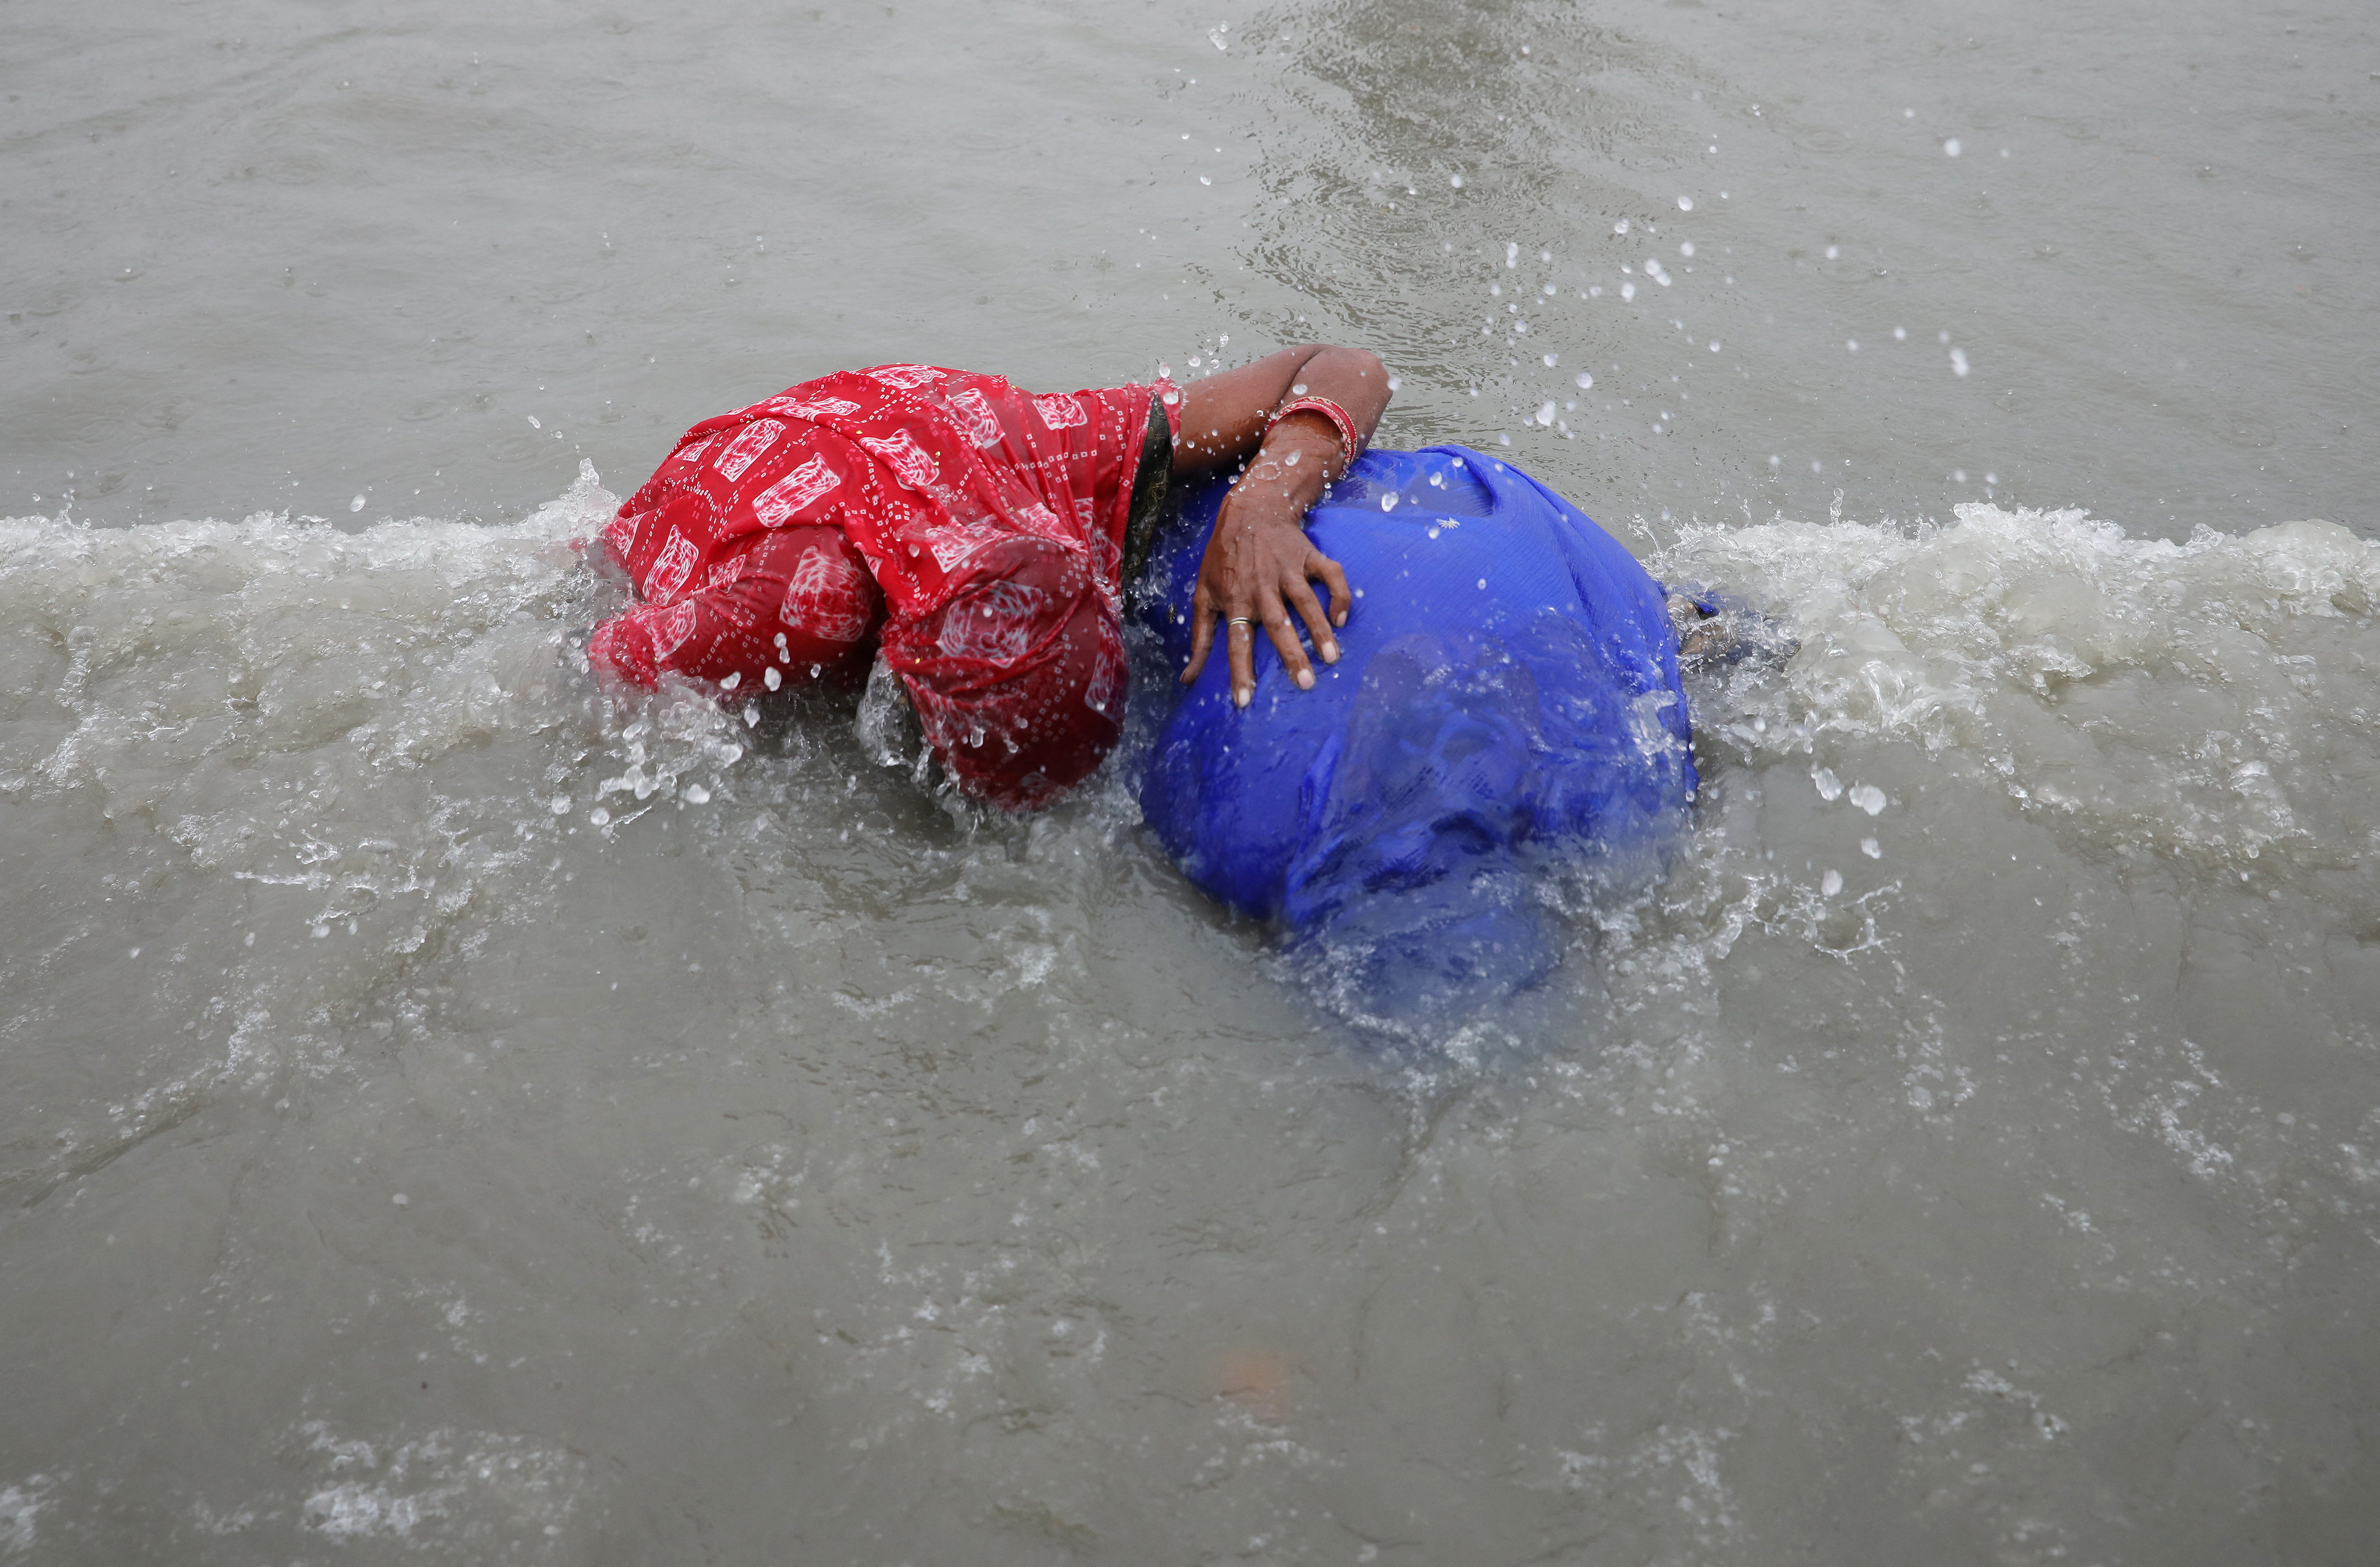 Hindu pilgrims take a dip as they gather at the confluence of the river Ganges and the Bay of Bengal on the occasion of 